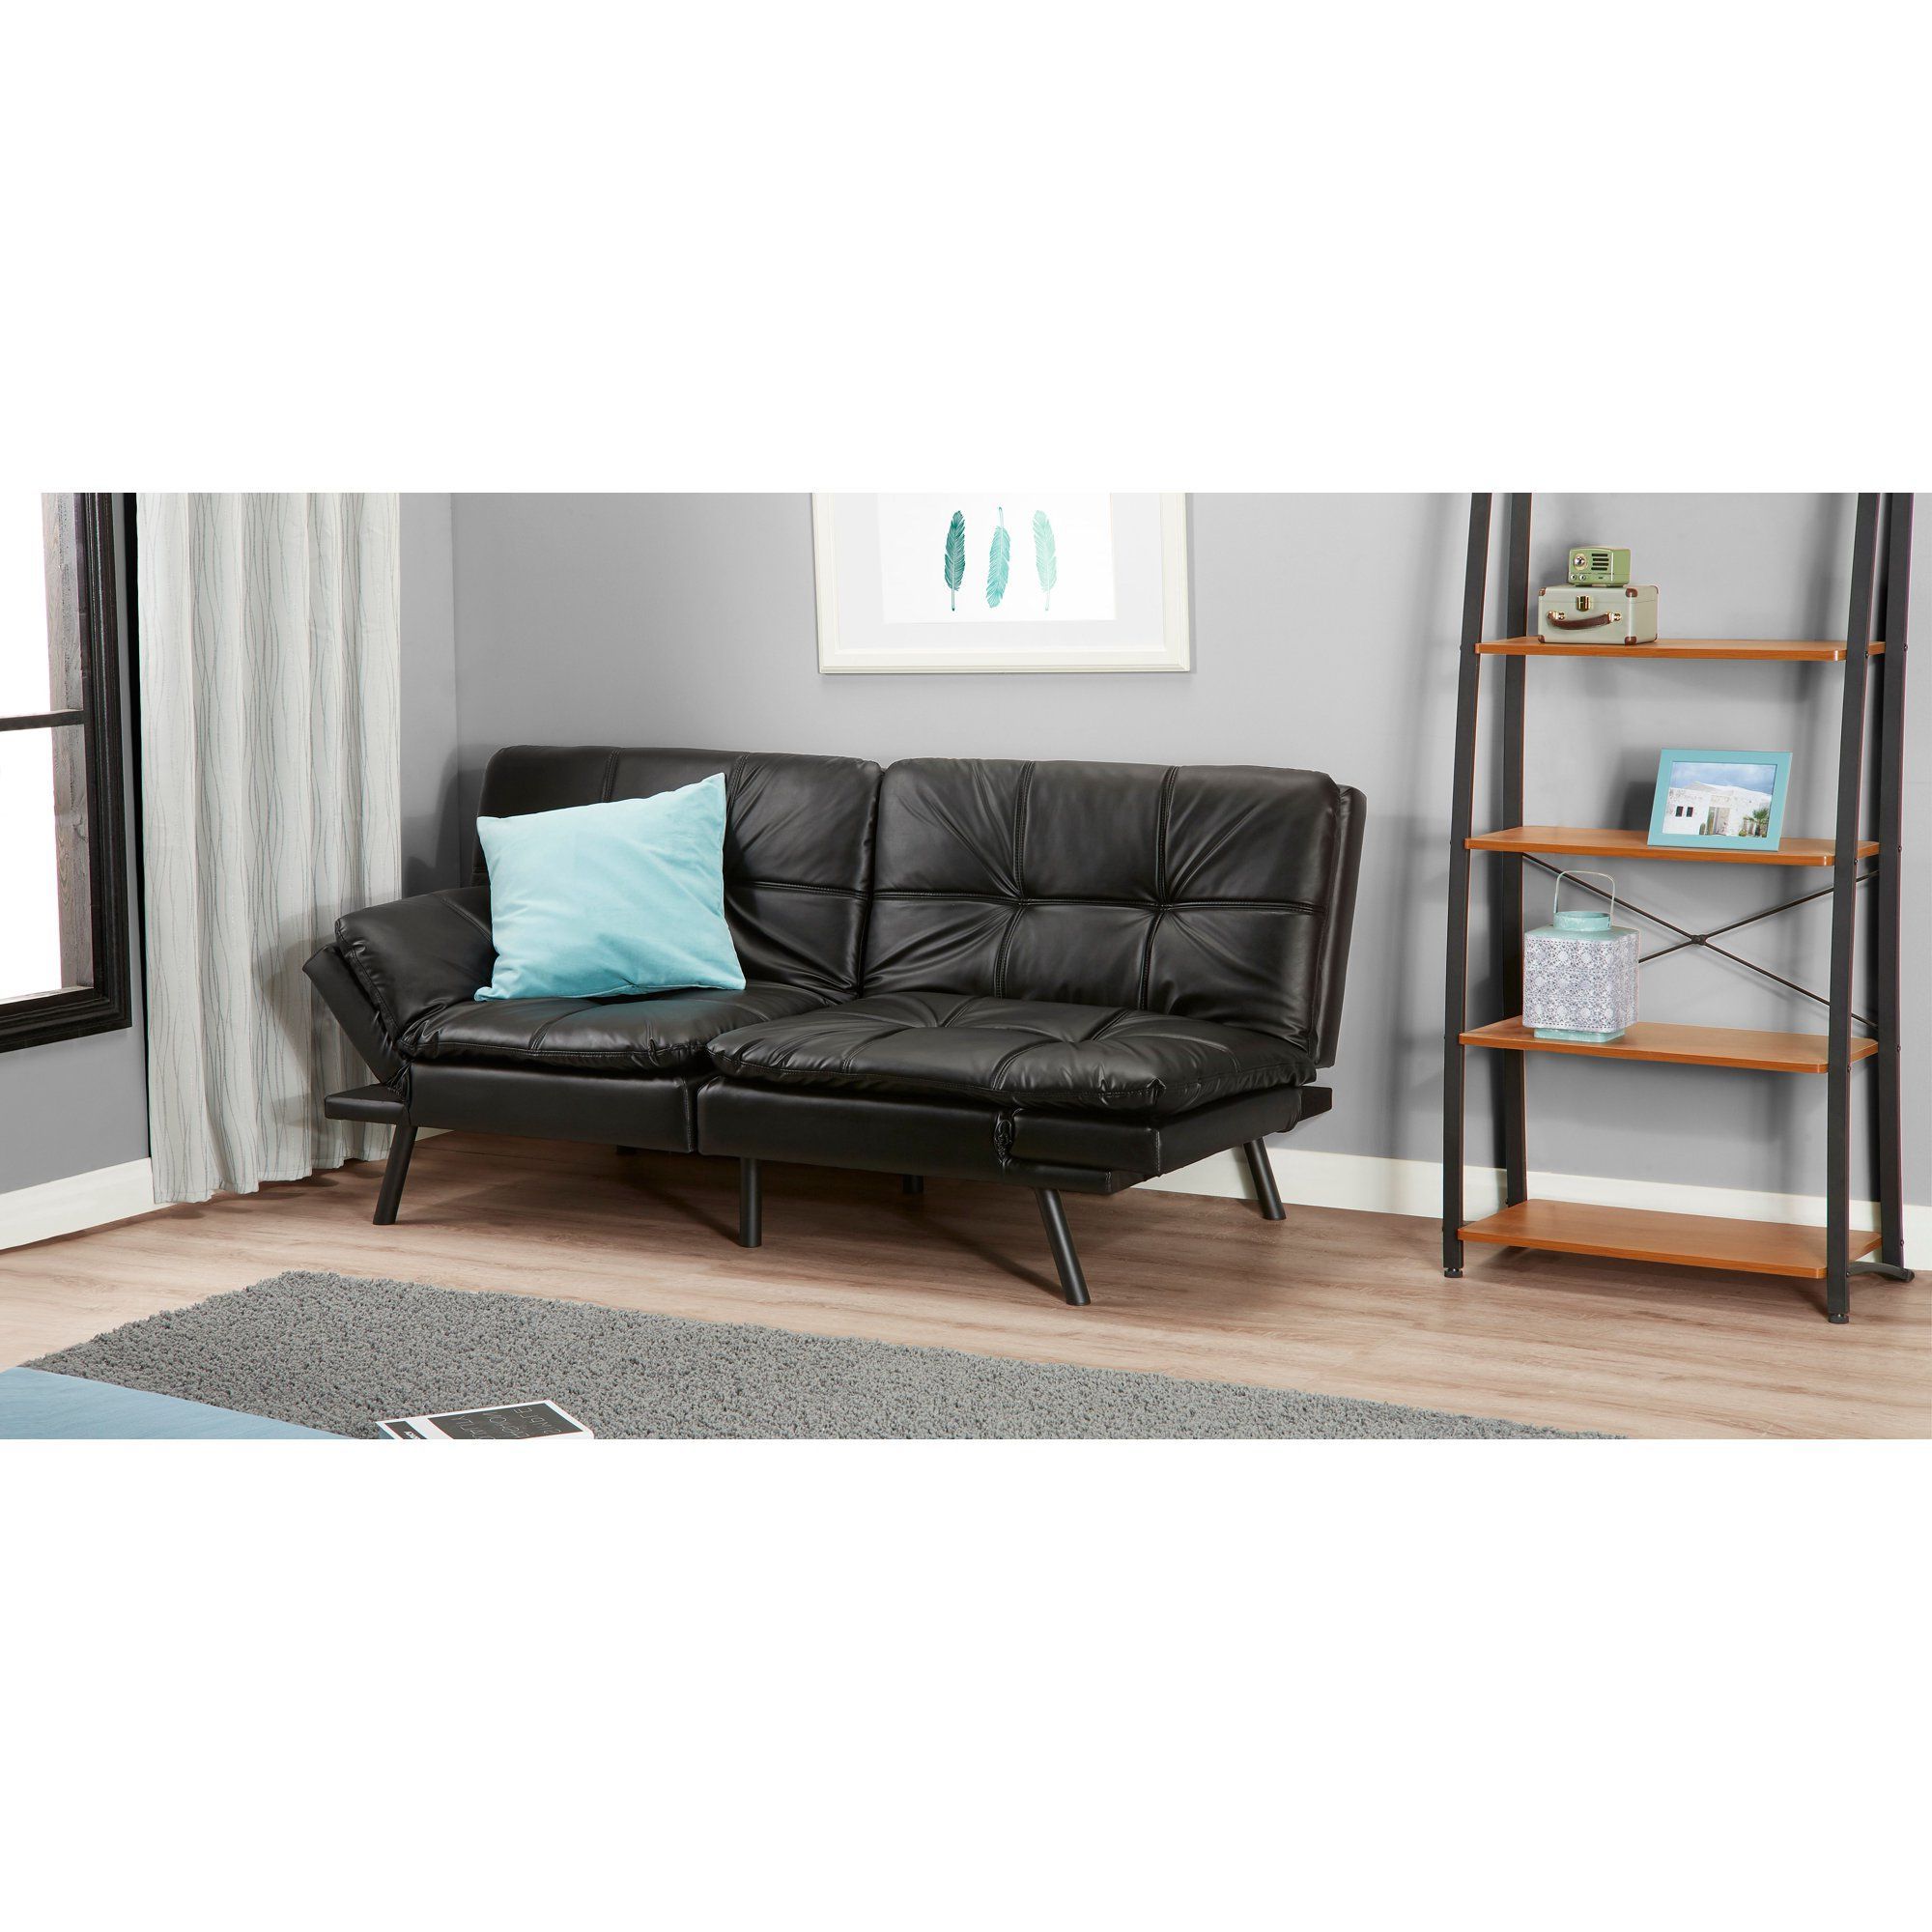 Black Faux Suede Memory Foam Sofas Within Recent Mainstays Memory Foam Futon, Black Faux Leather, 72'' – Walmart (View 6 of 15)